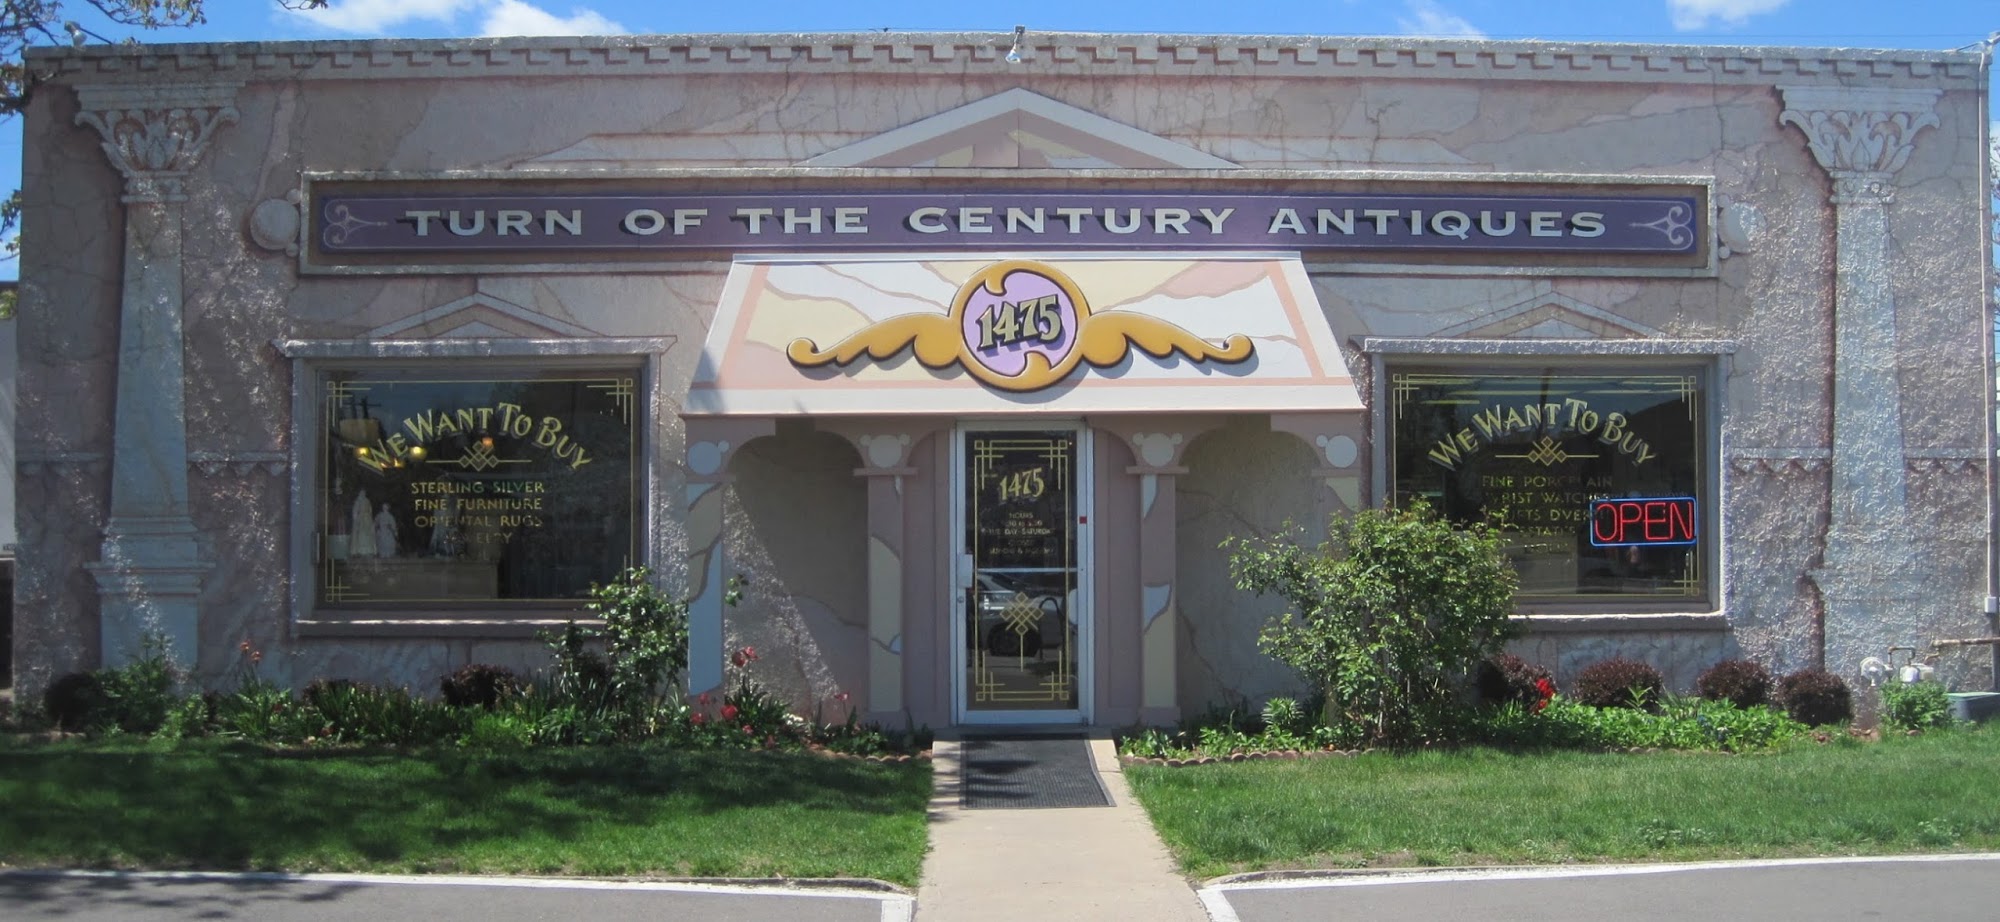 Turn of the Century Antiques